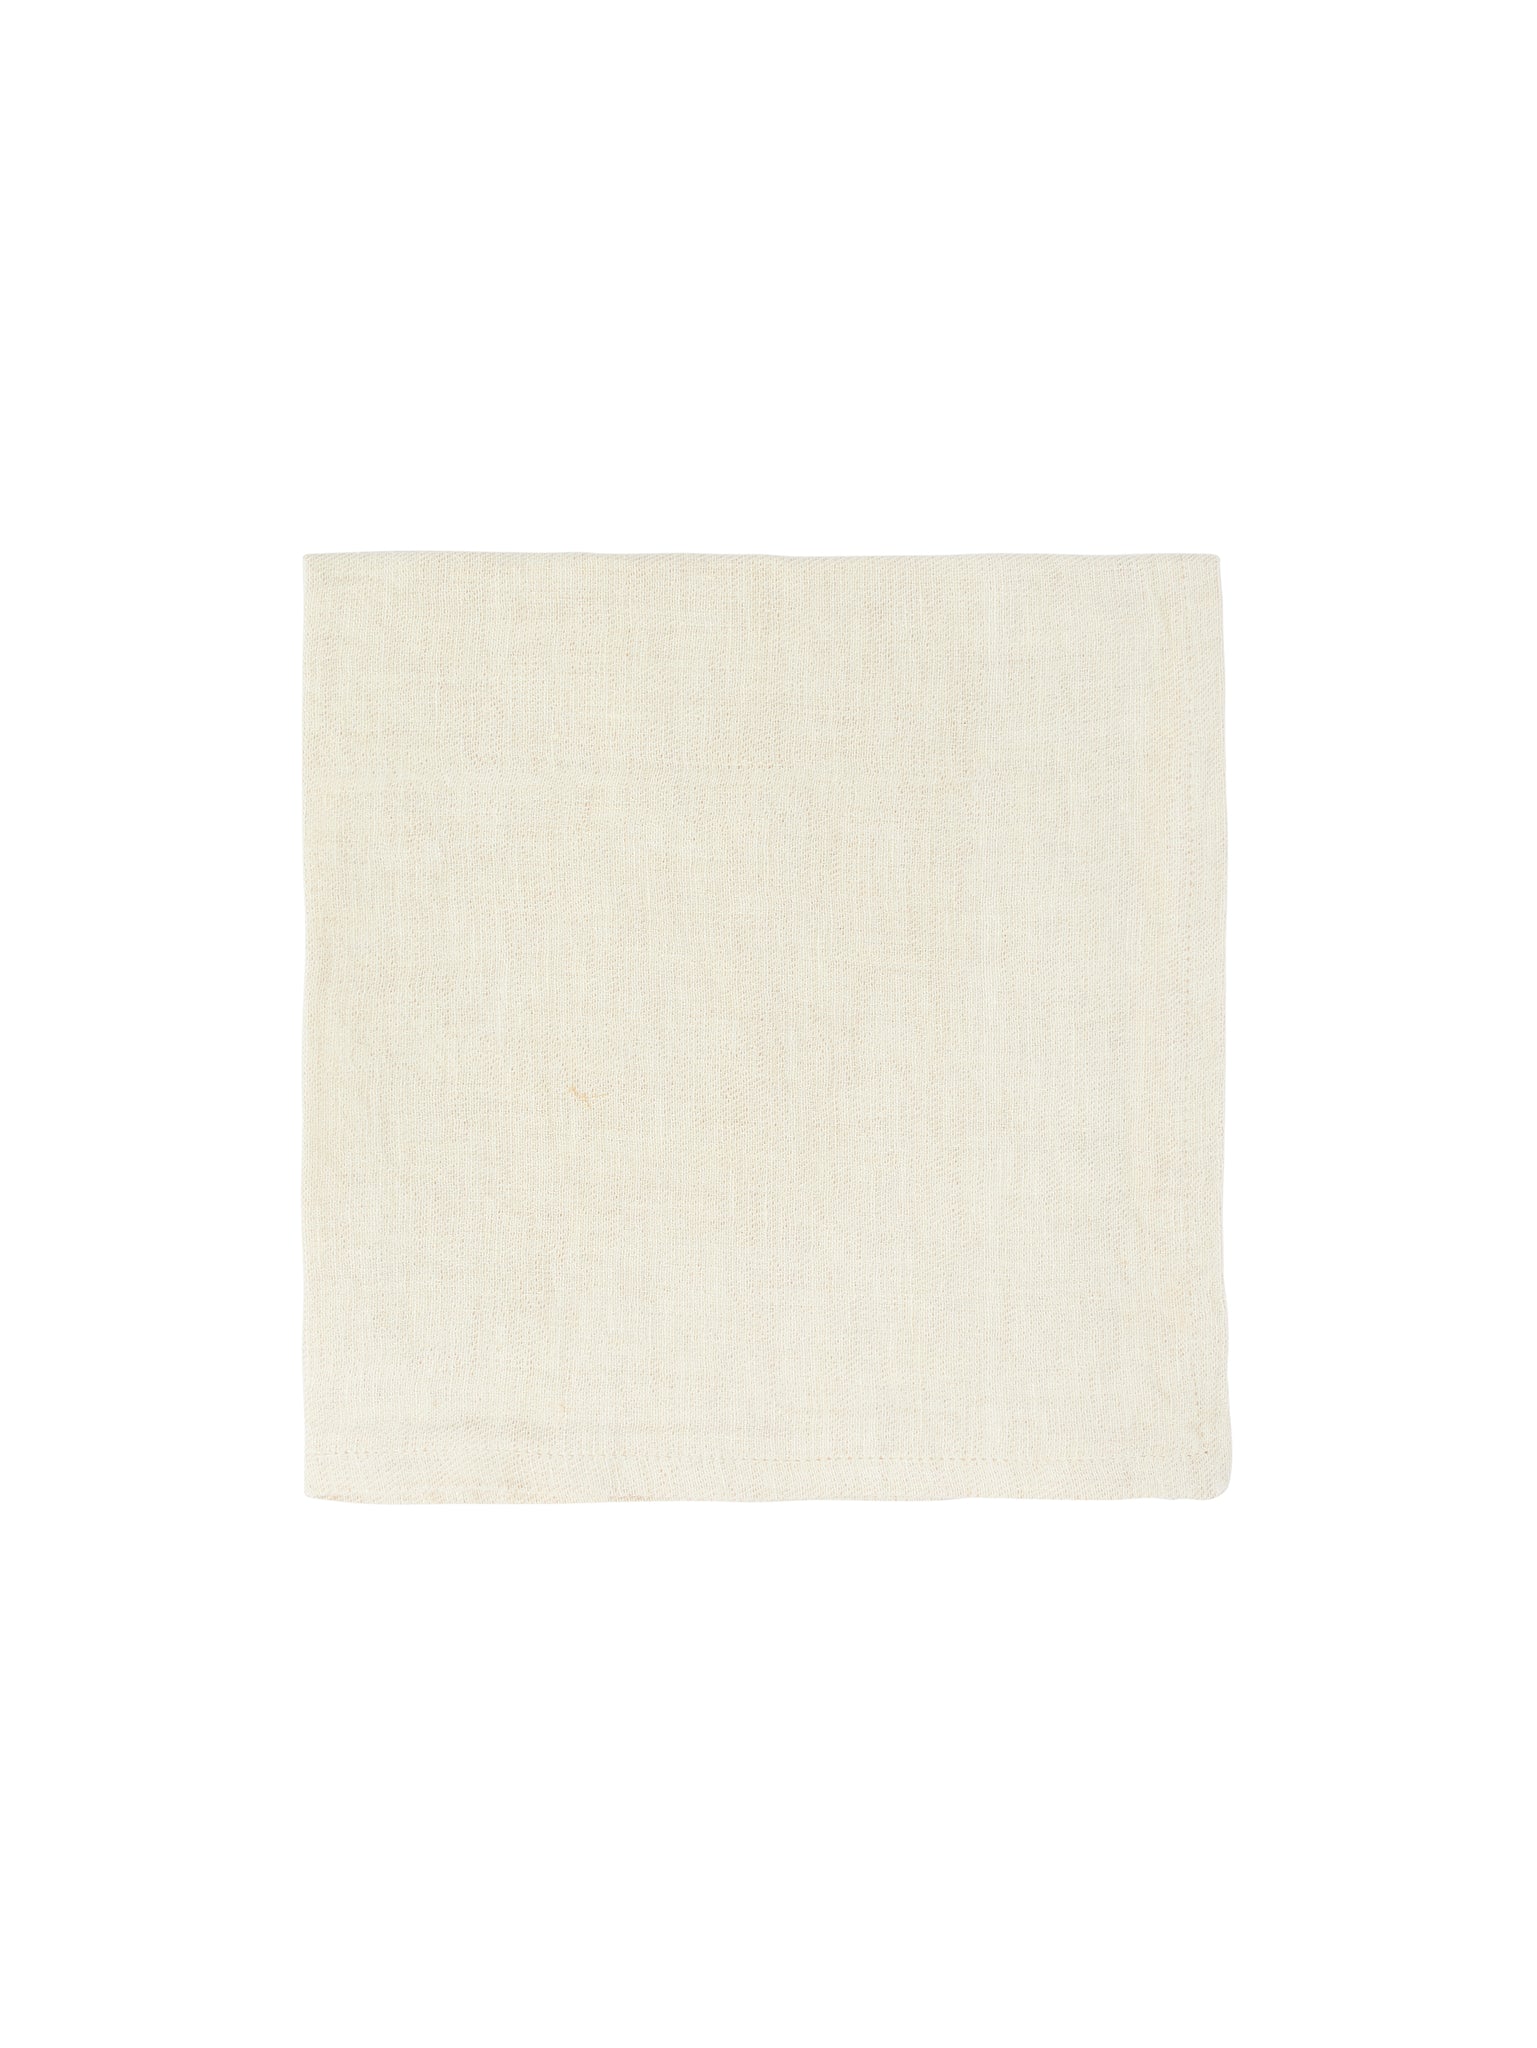 Double Sided Linen Dinner Napkins Cream and Linen Weston Table